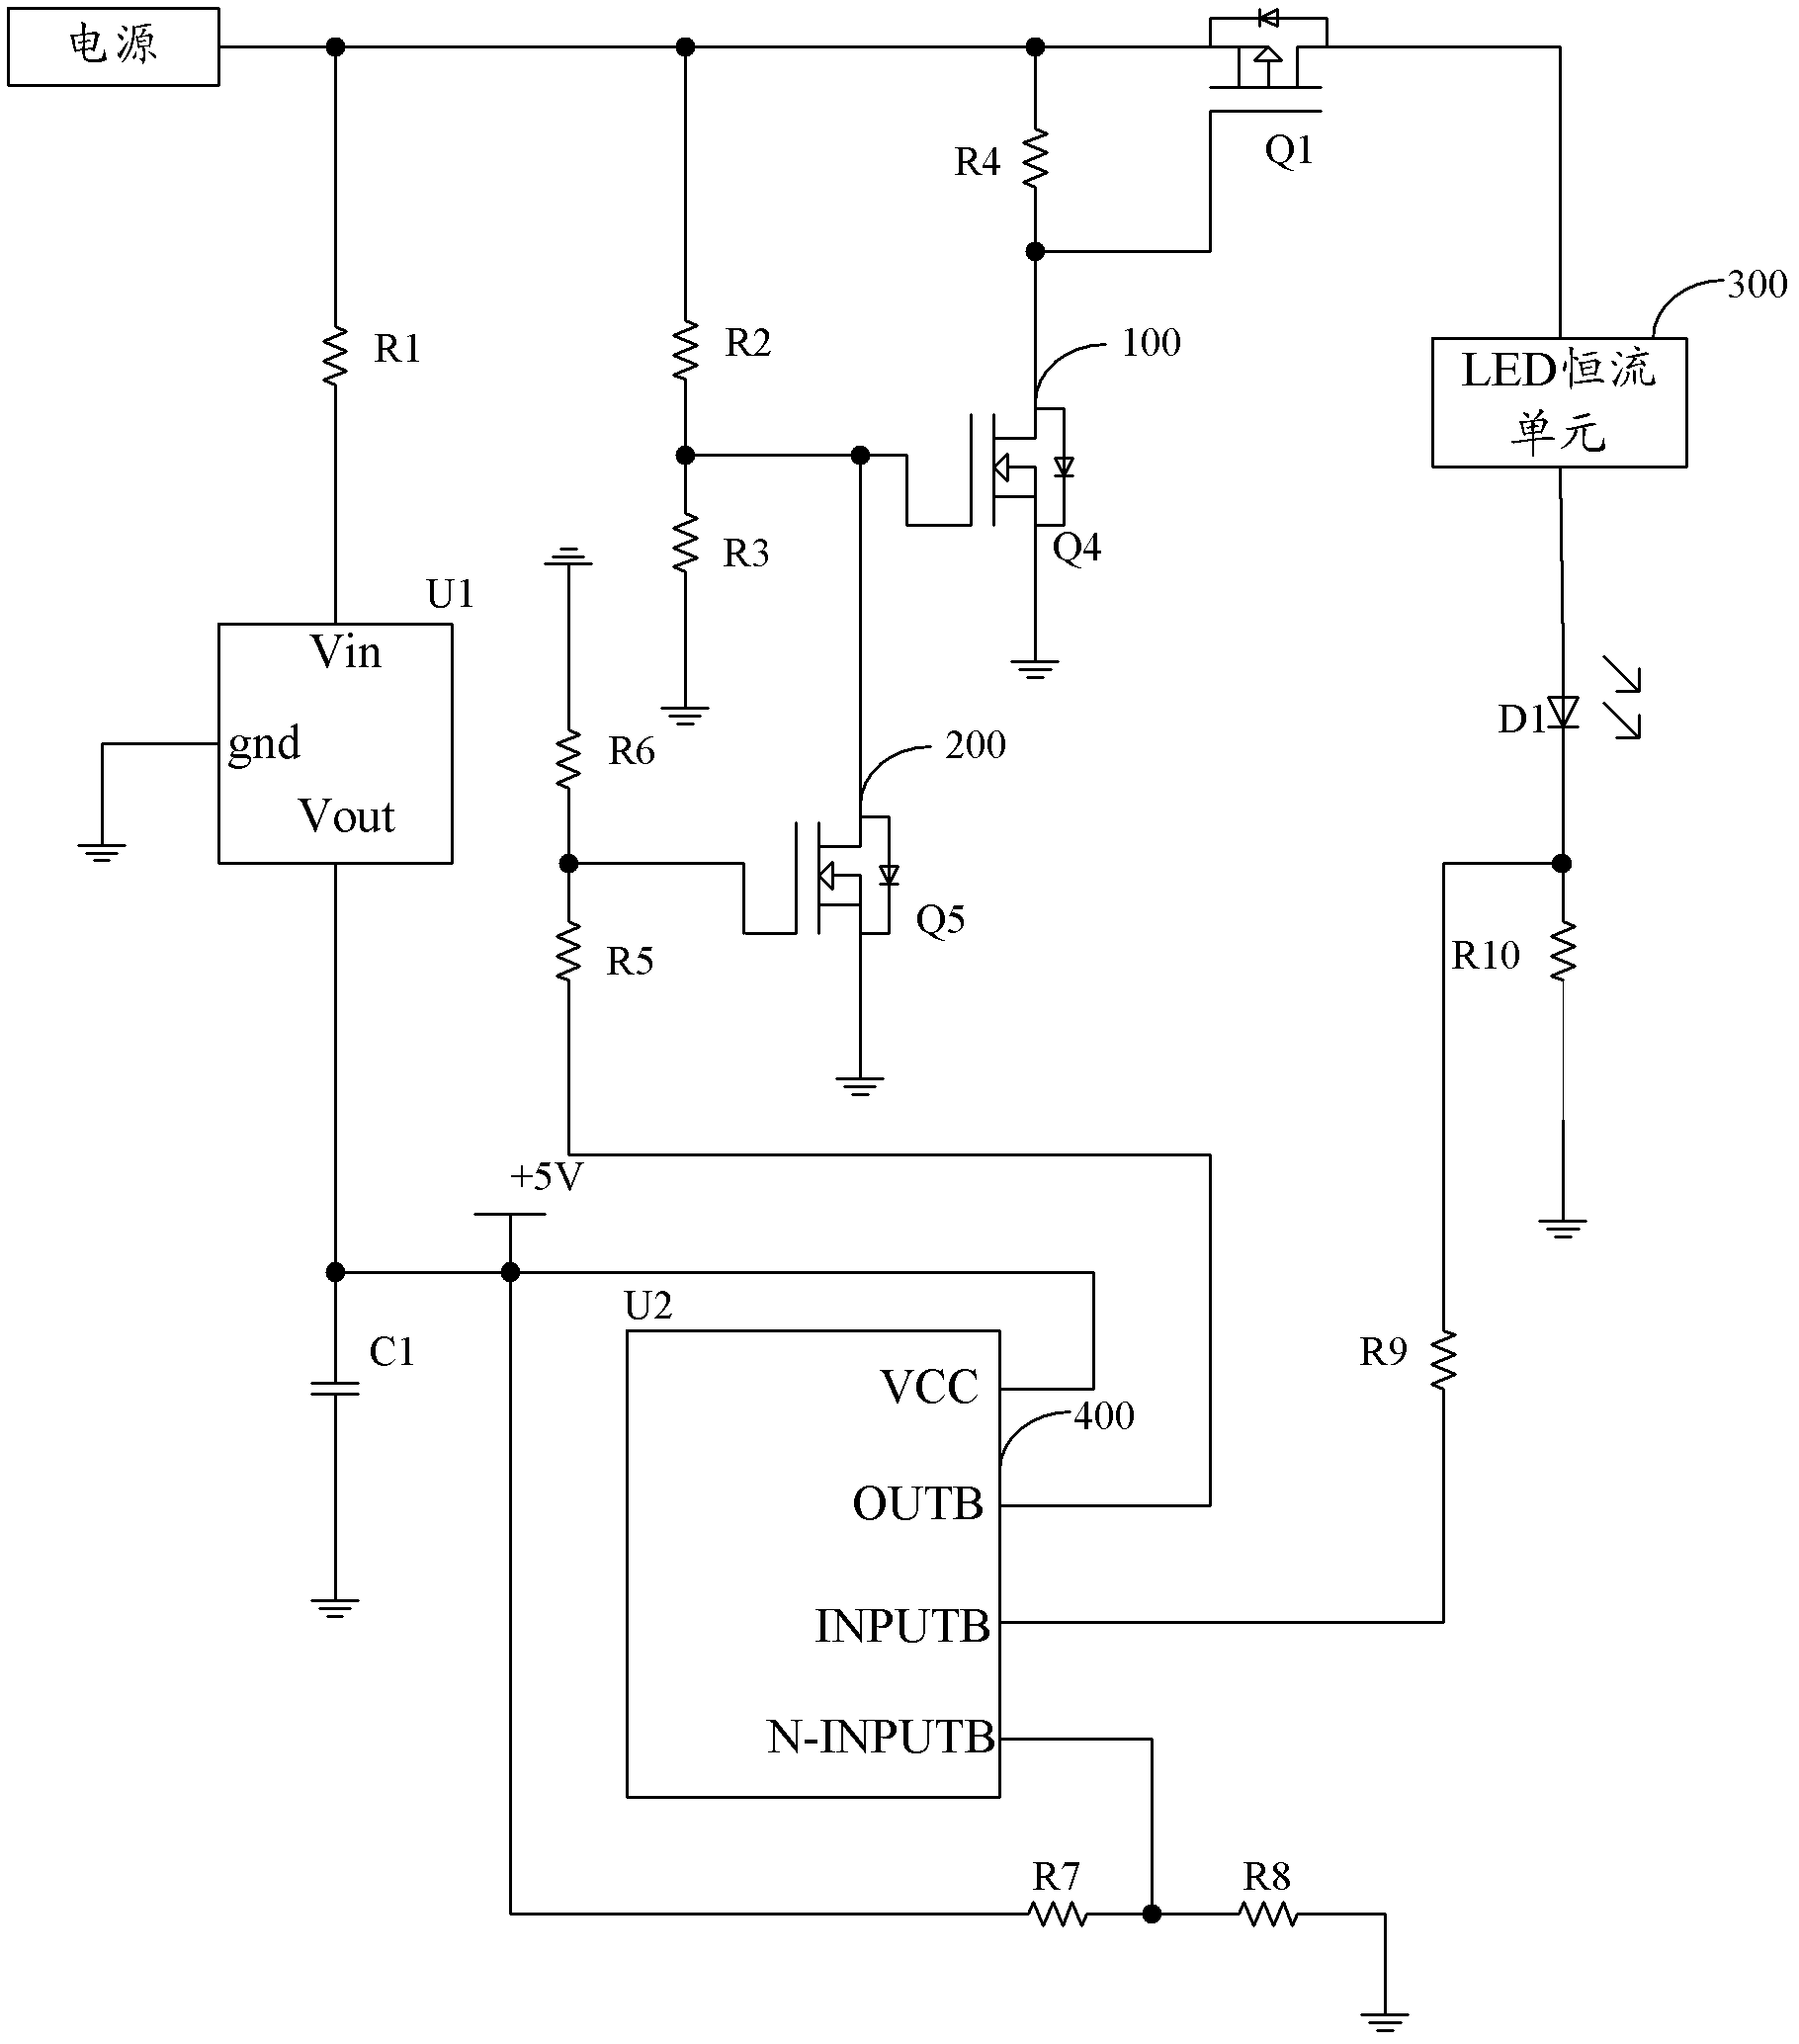 Light-emitting diode (LED) over current protection circuit and light fitting